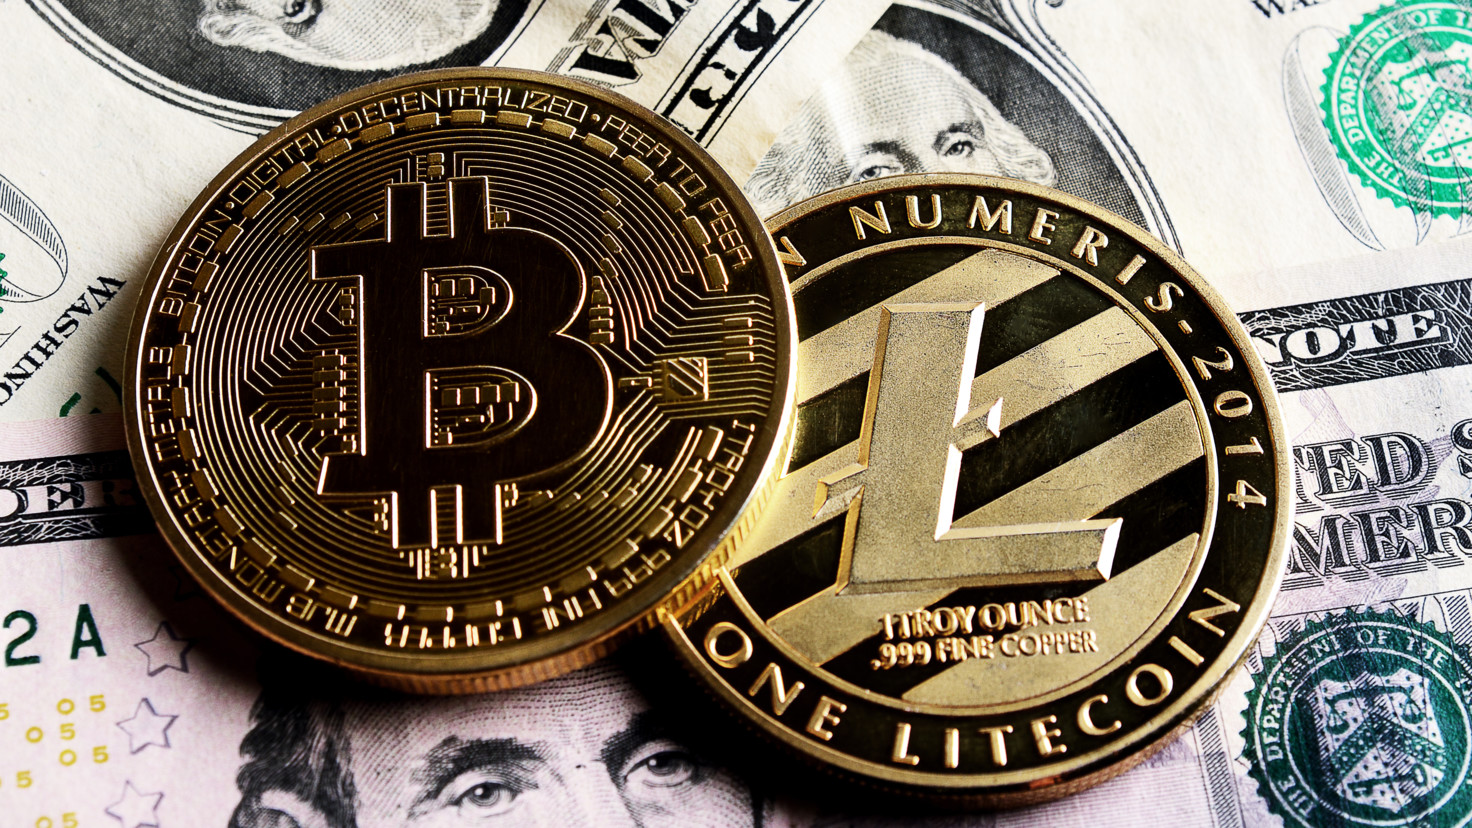 Bitcoin and litecoin tokens on top of US dollar bills